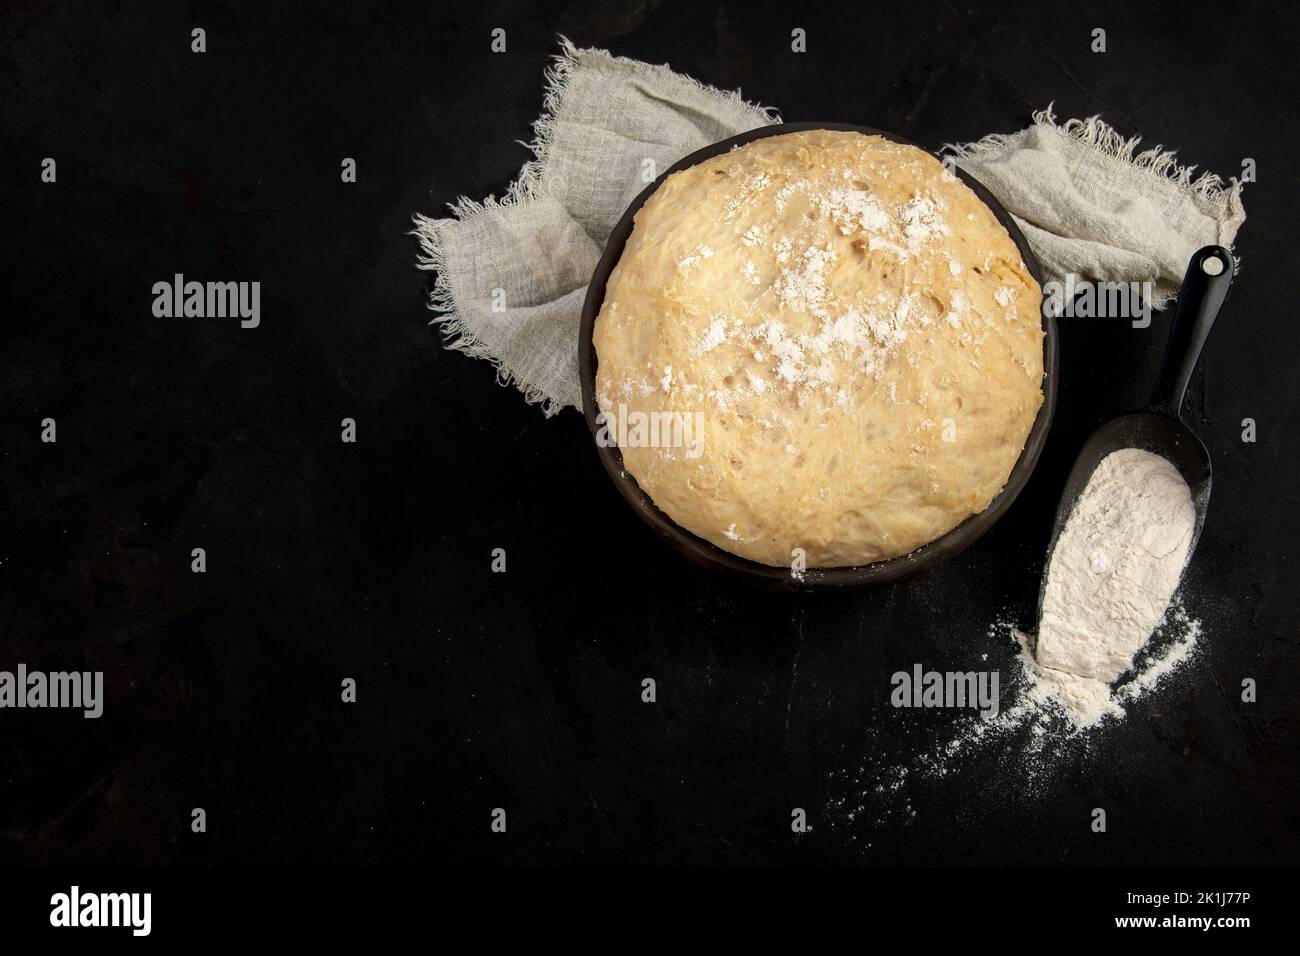 Raw dough pastry in a bowl on dark background. Homemade bio food concept. Top view, copy space Stock Photo